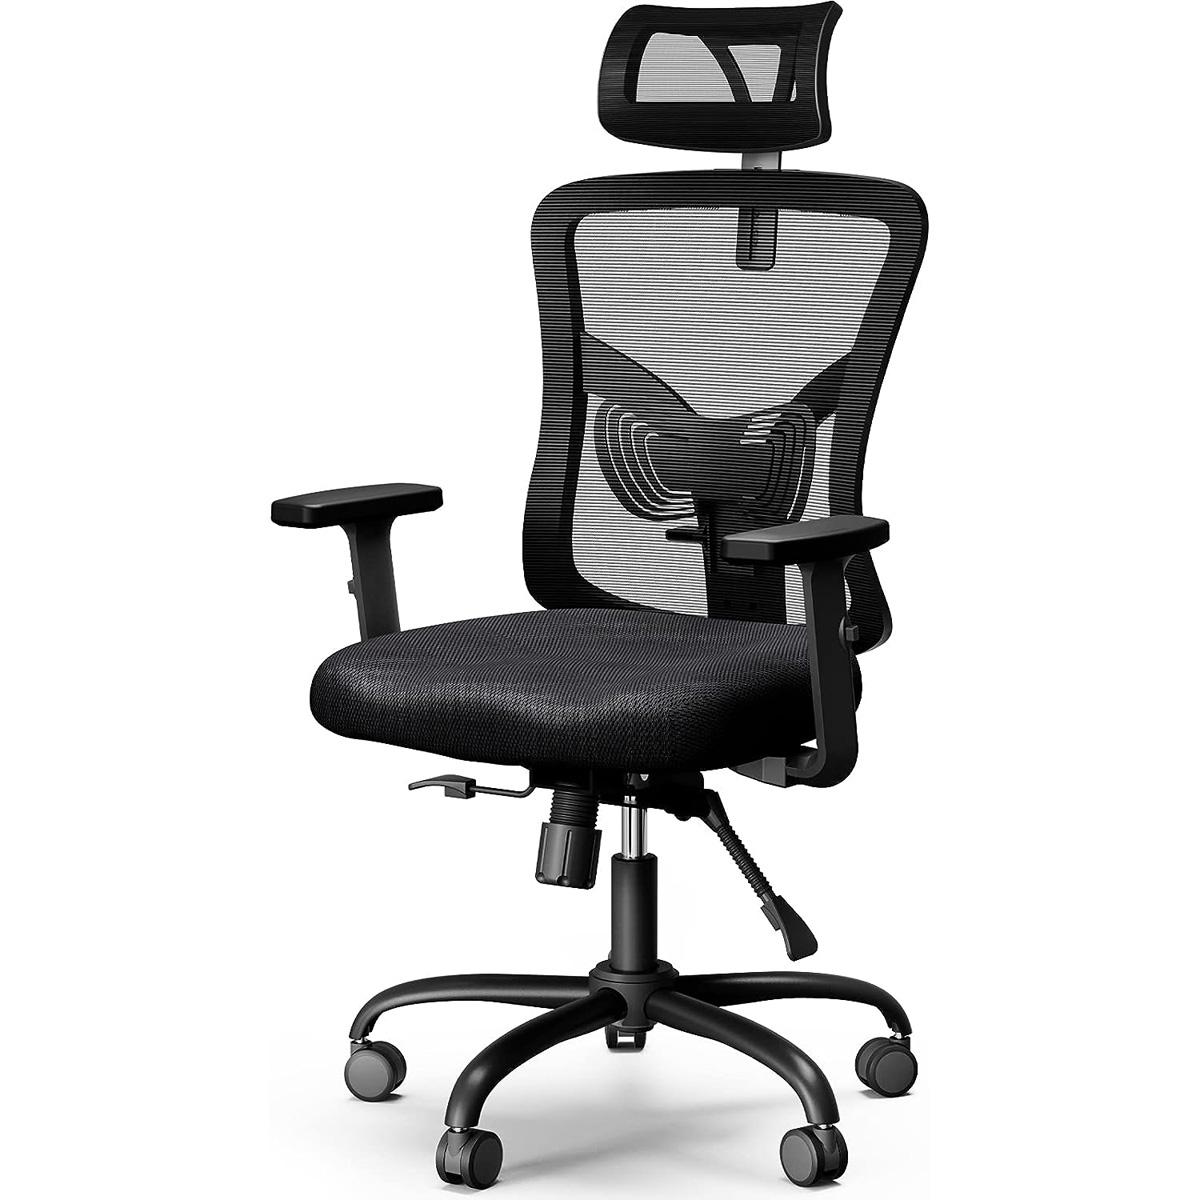 Noblewell Adjustable Lumbar Support Office Chair for $79.39 Shipped